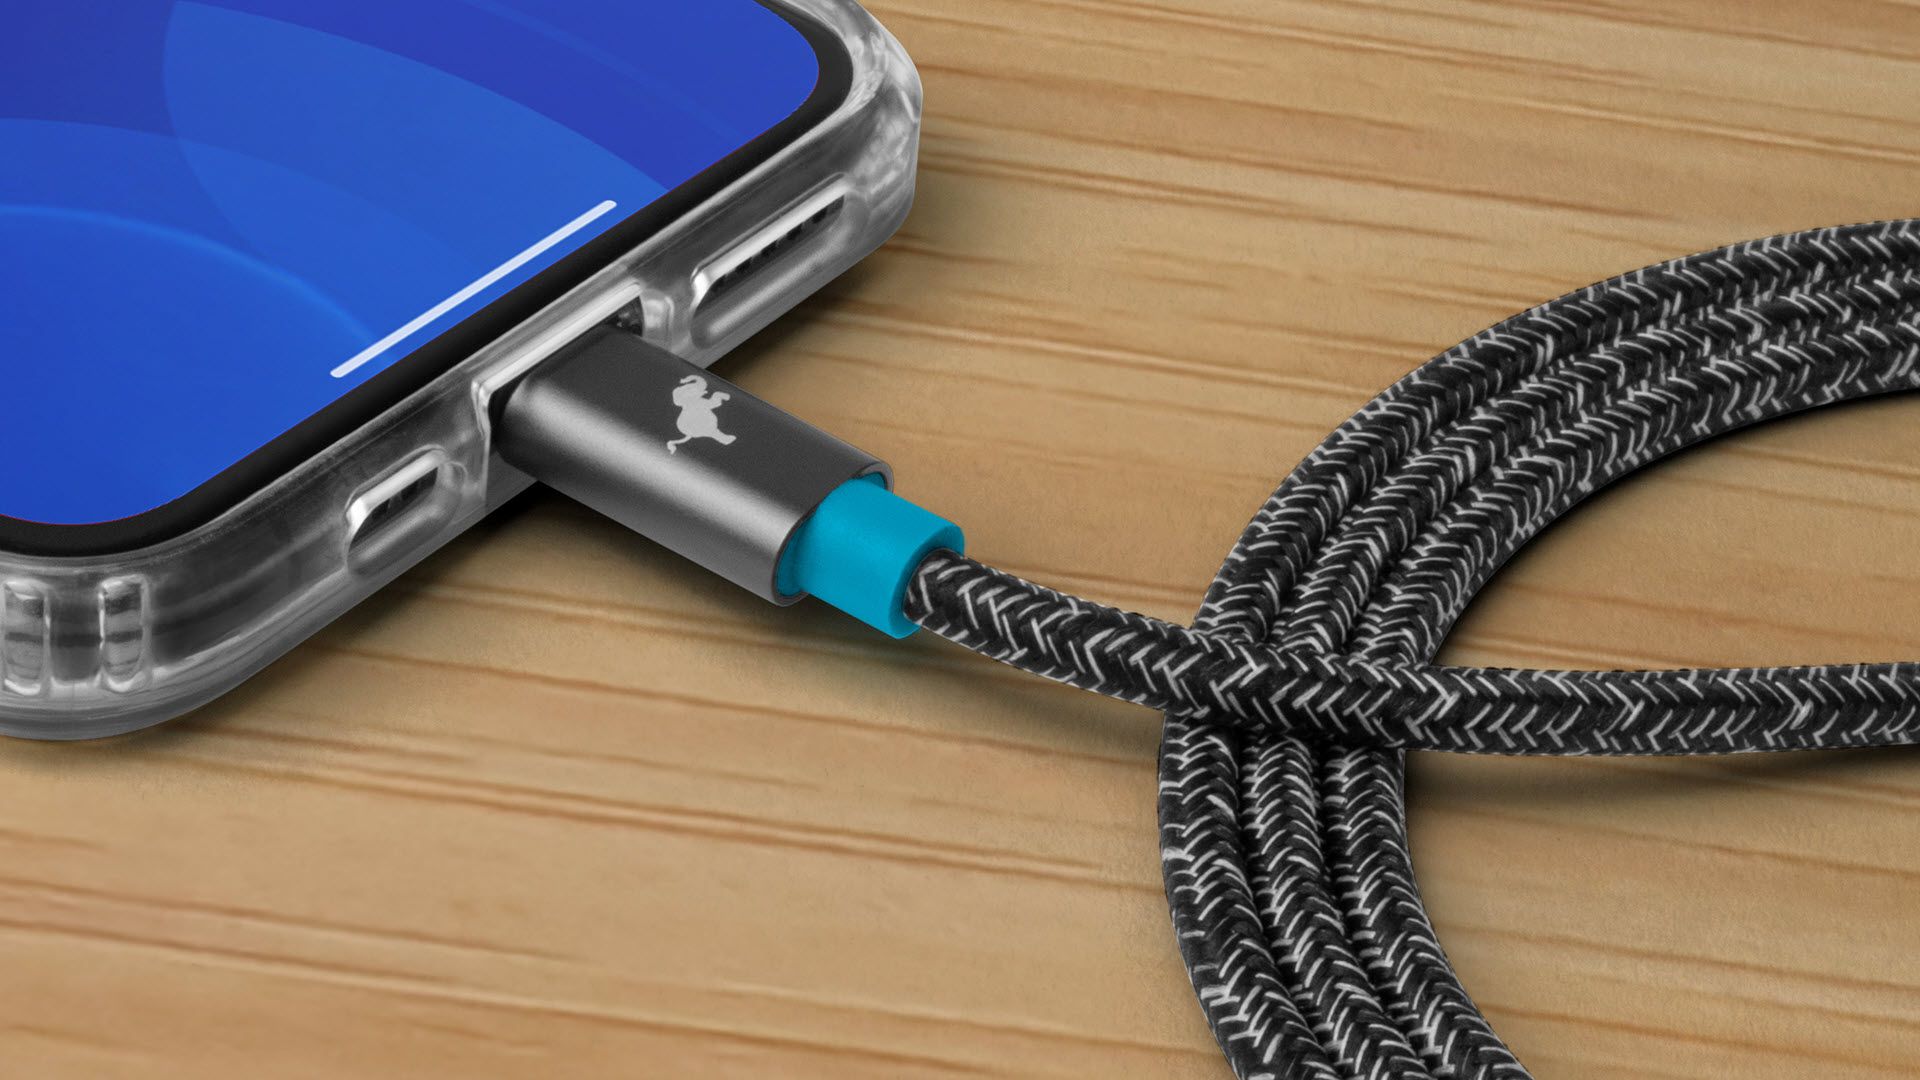 A PowerKnit cable connected to an iPhone